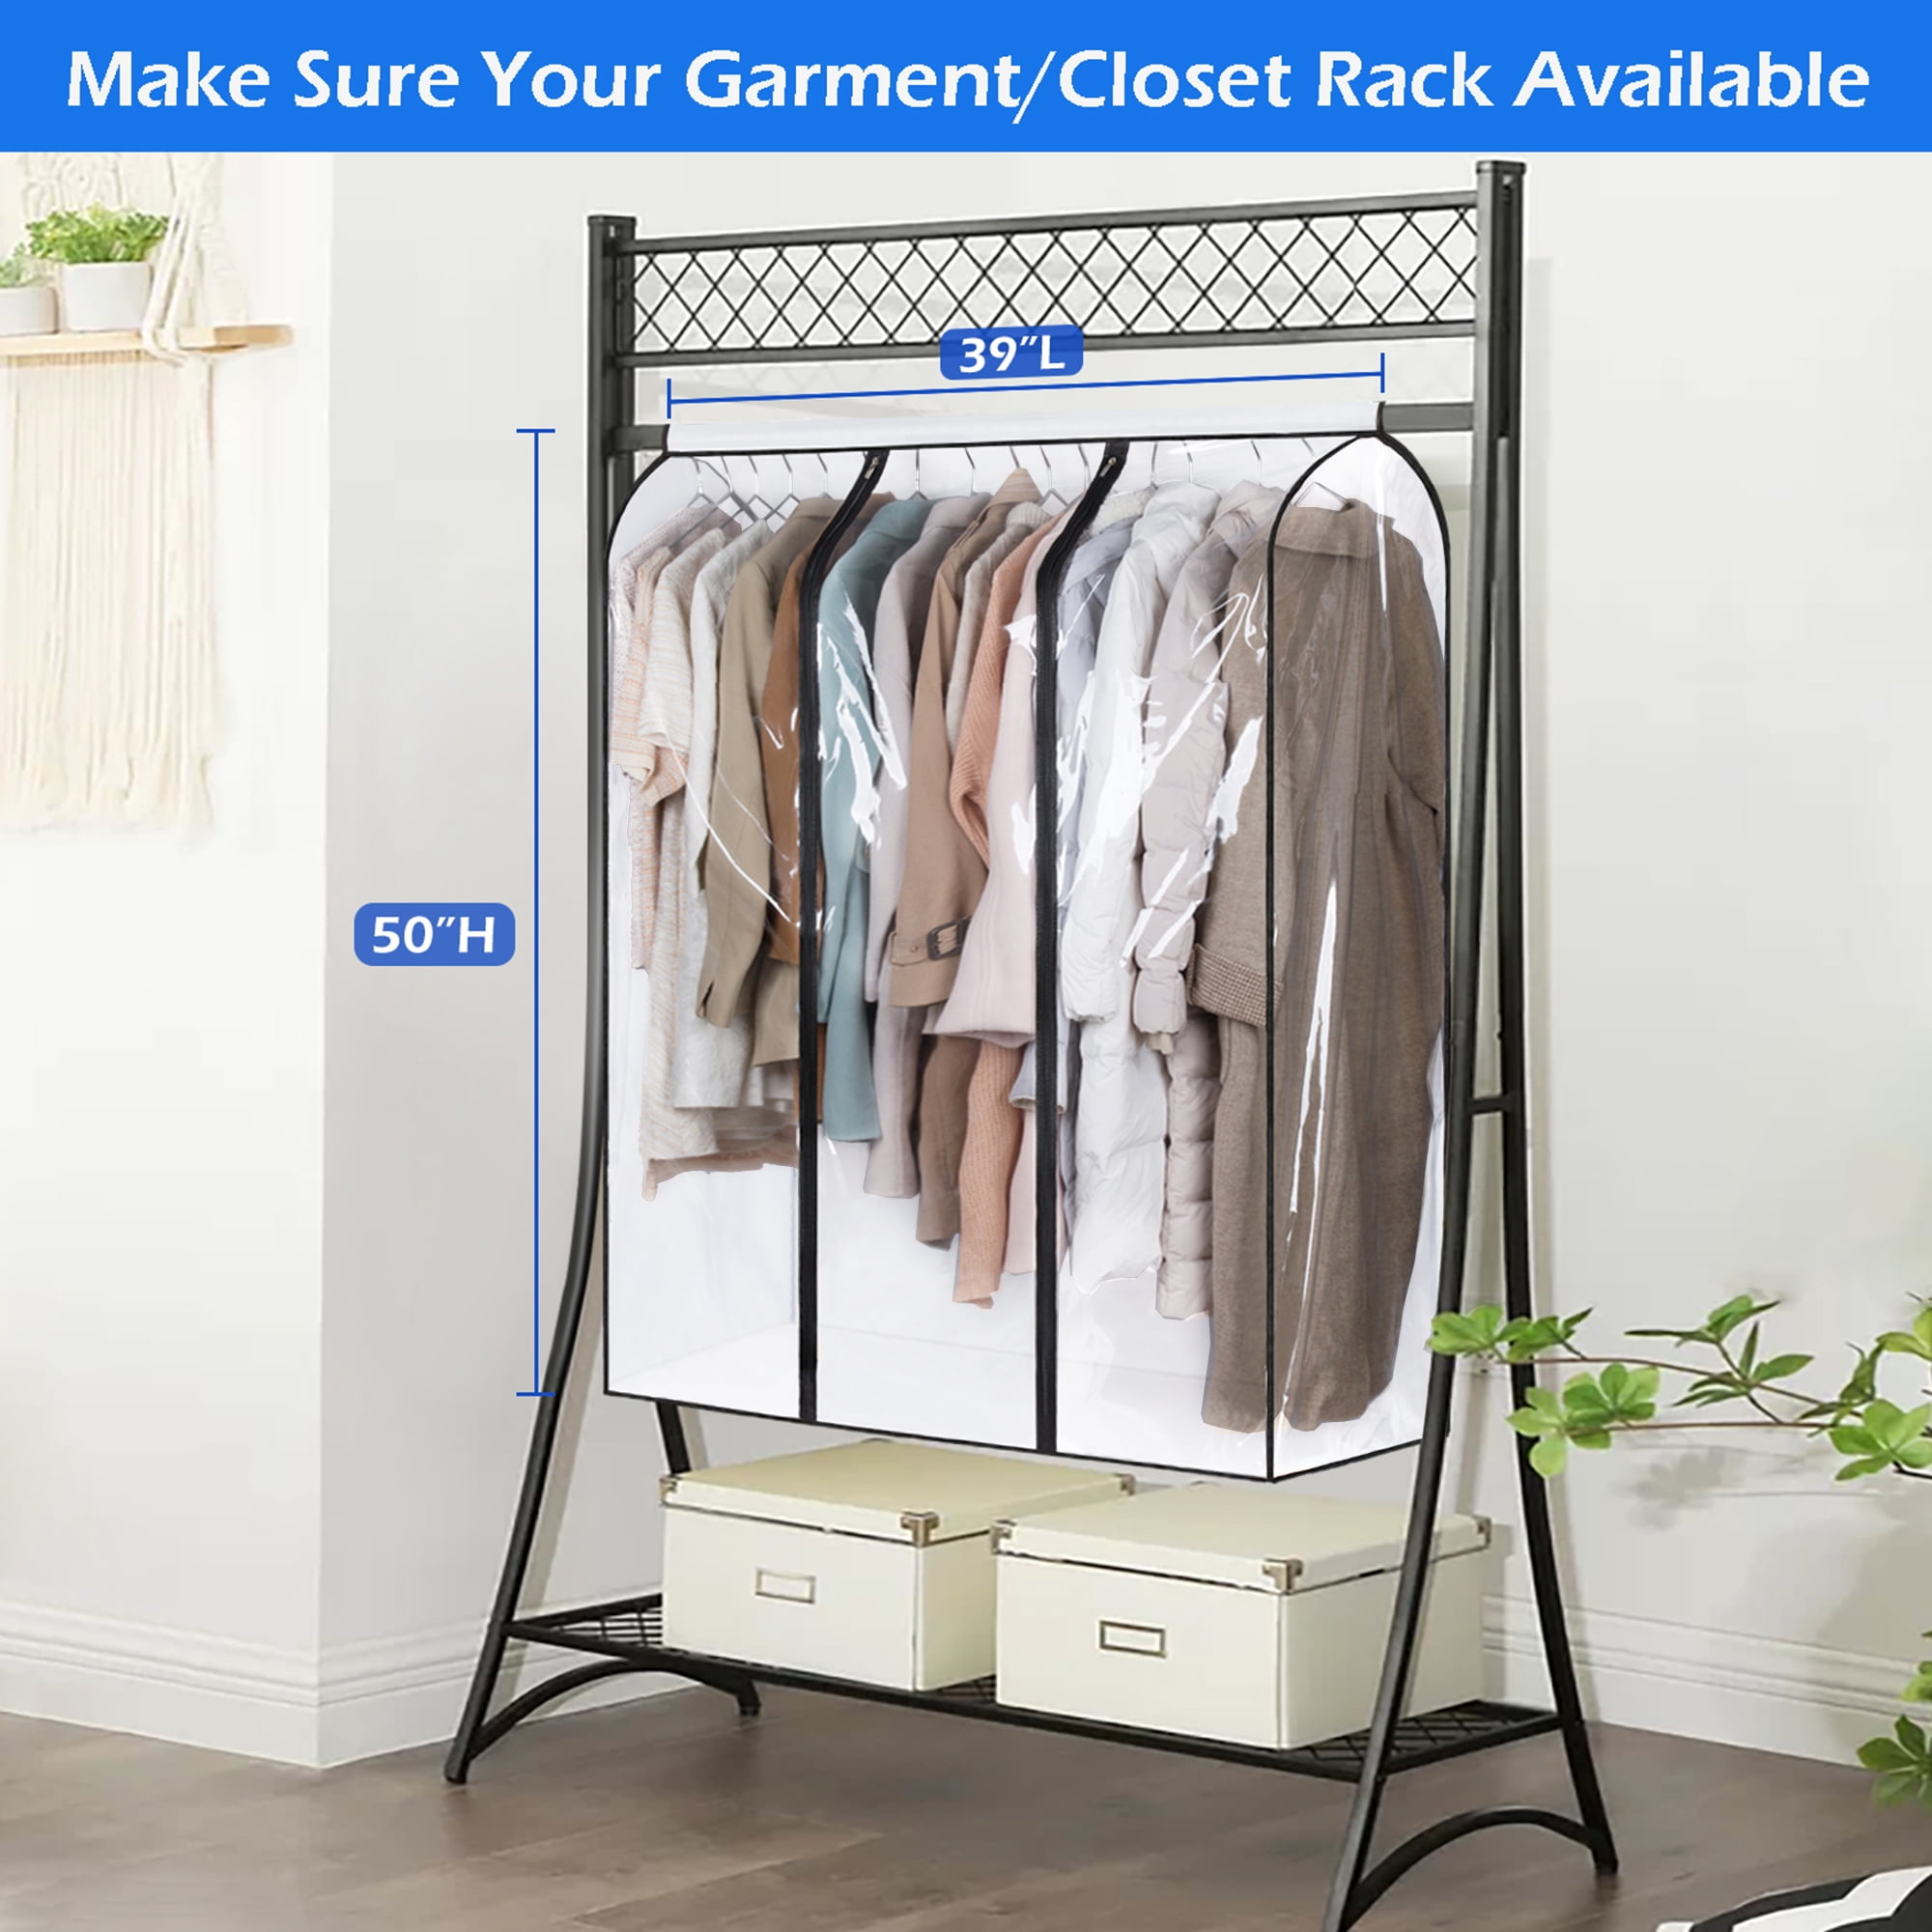 Misslo Hanging Garment Bags for Travel Closet Storage 50 inch Moving Bags for Clothes, Dress, Jacket, Shirt, Suit Cover, Black, Adult Unisex